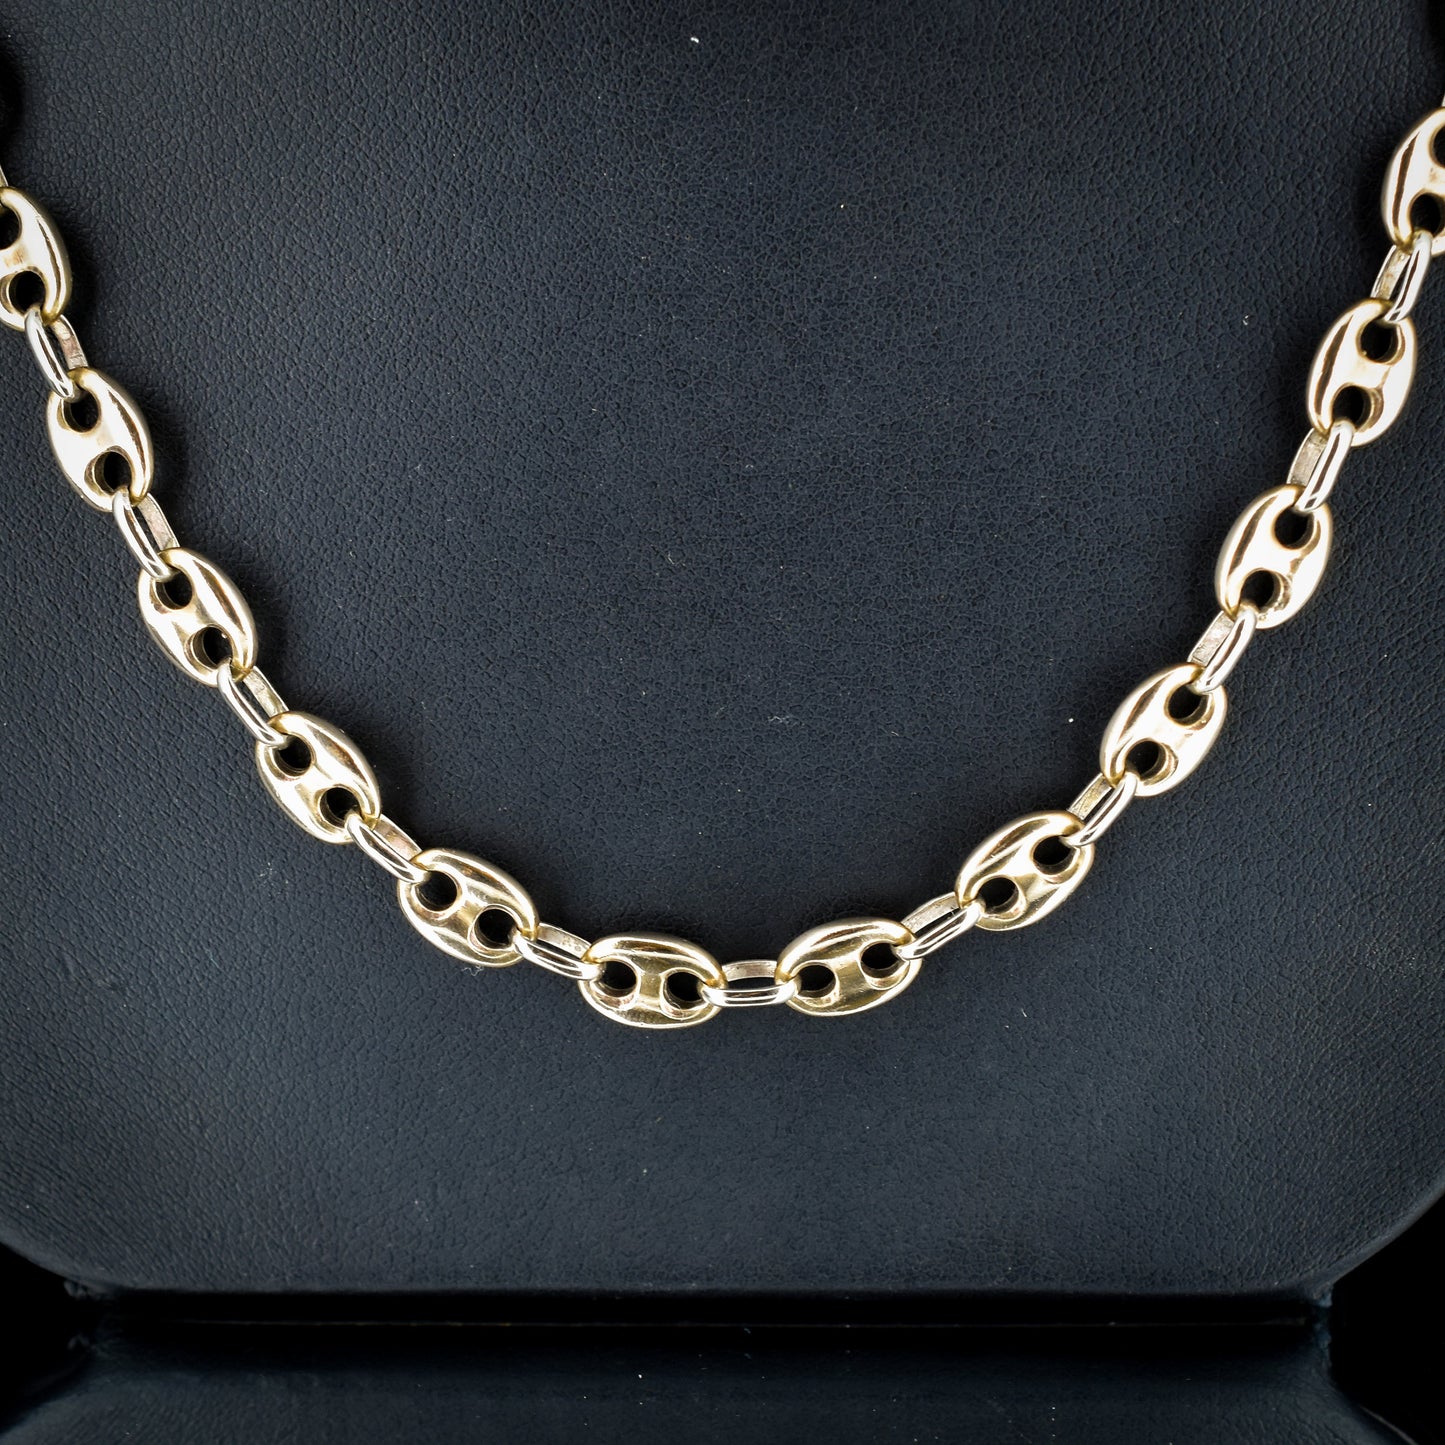 Vintage 9ct Gold 21.5"" Mariner Anchor Link Chain Necklace (34.3g)